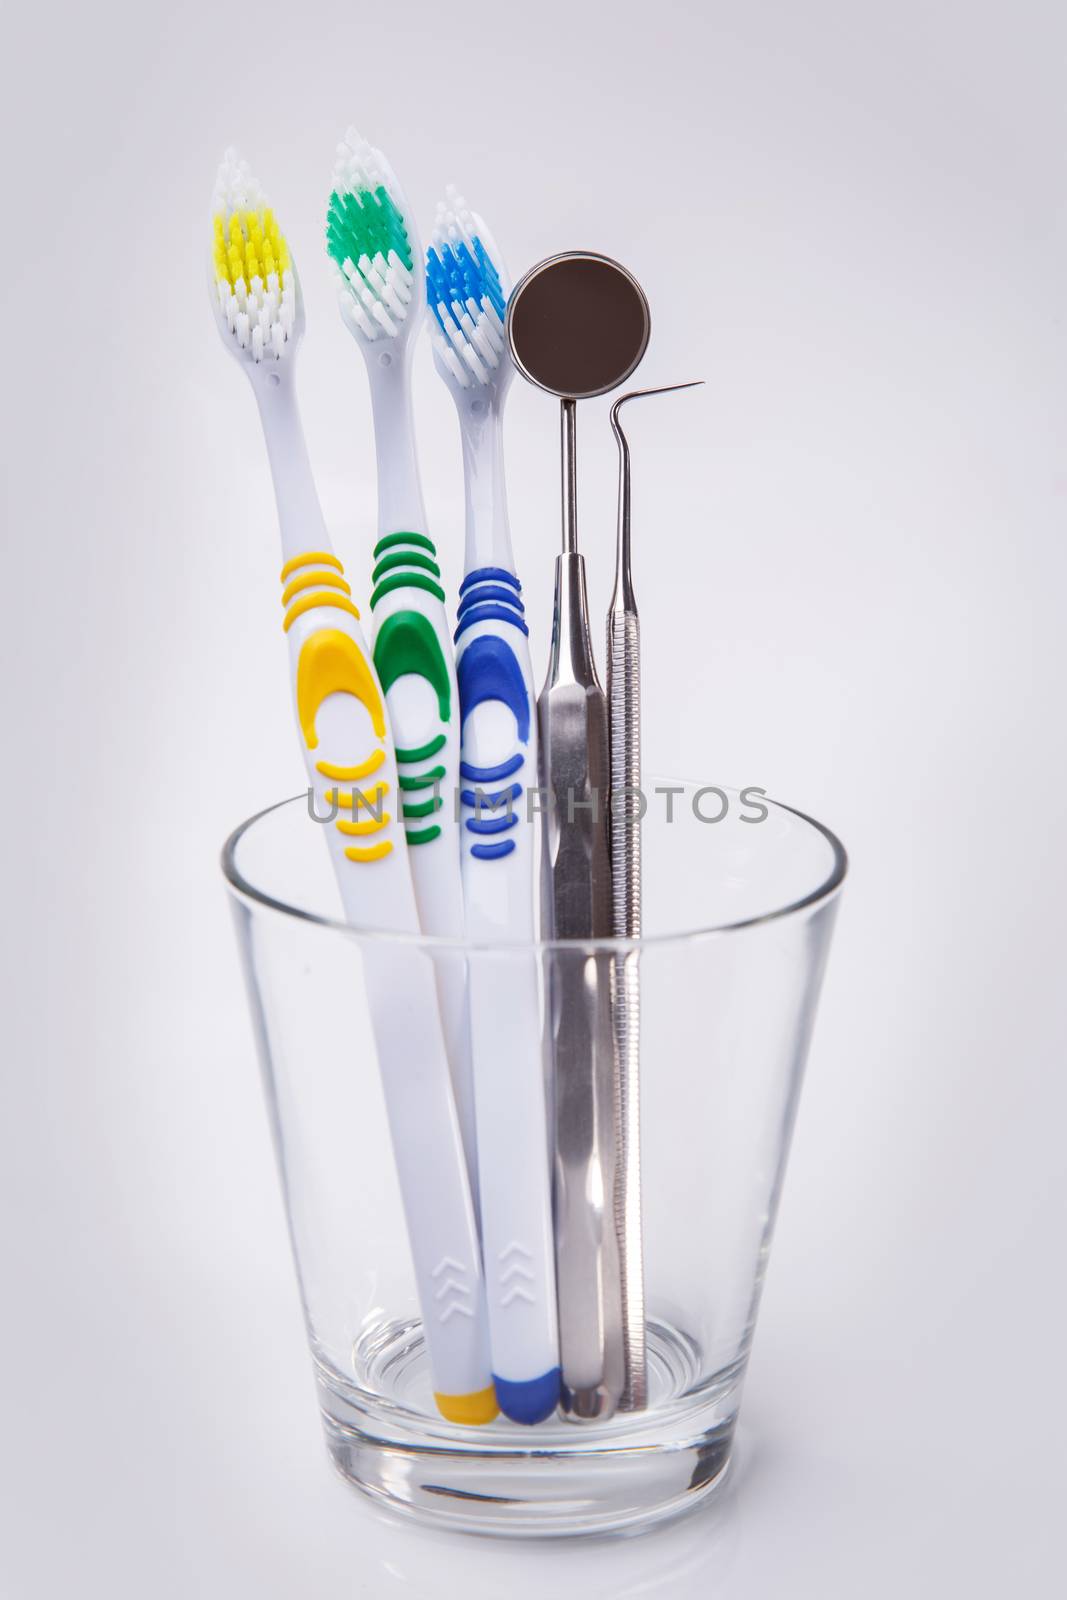 Toothbrushes in a glass by rufatjumali